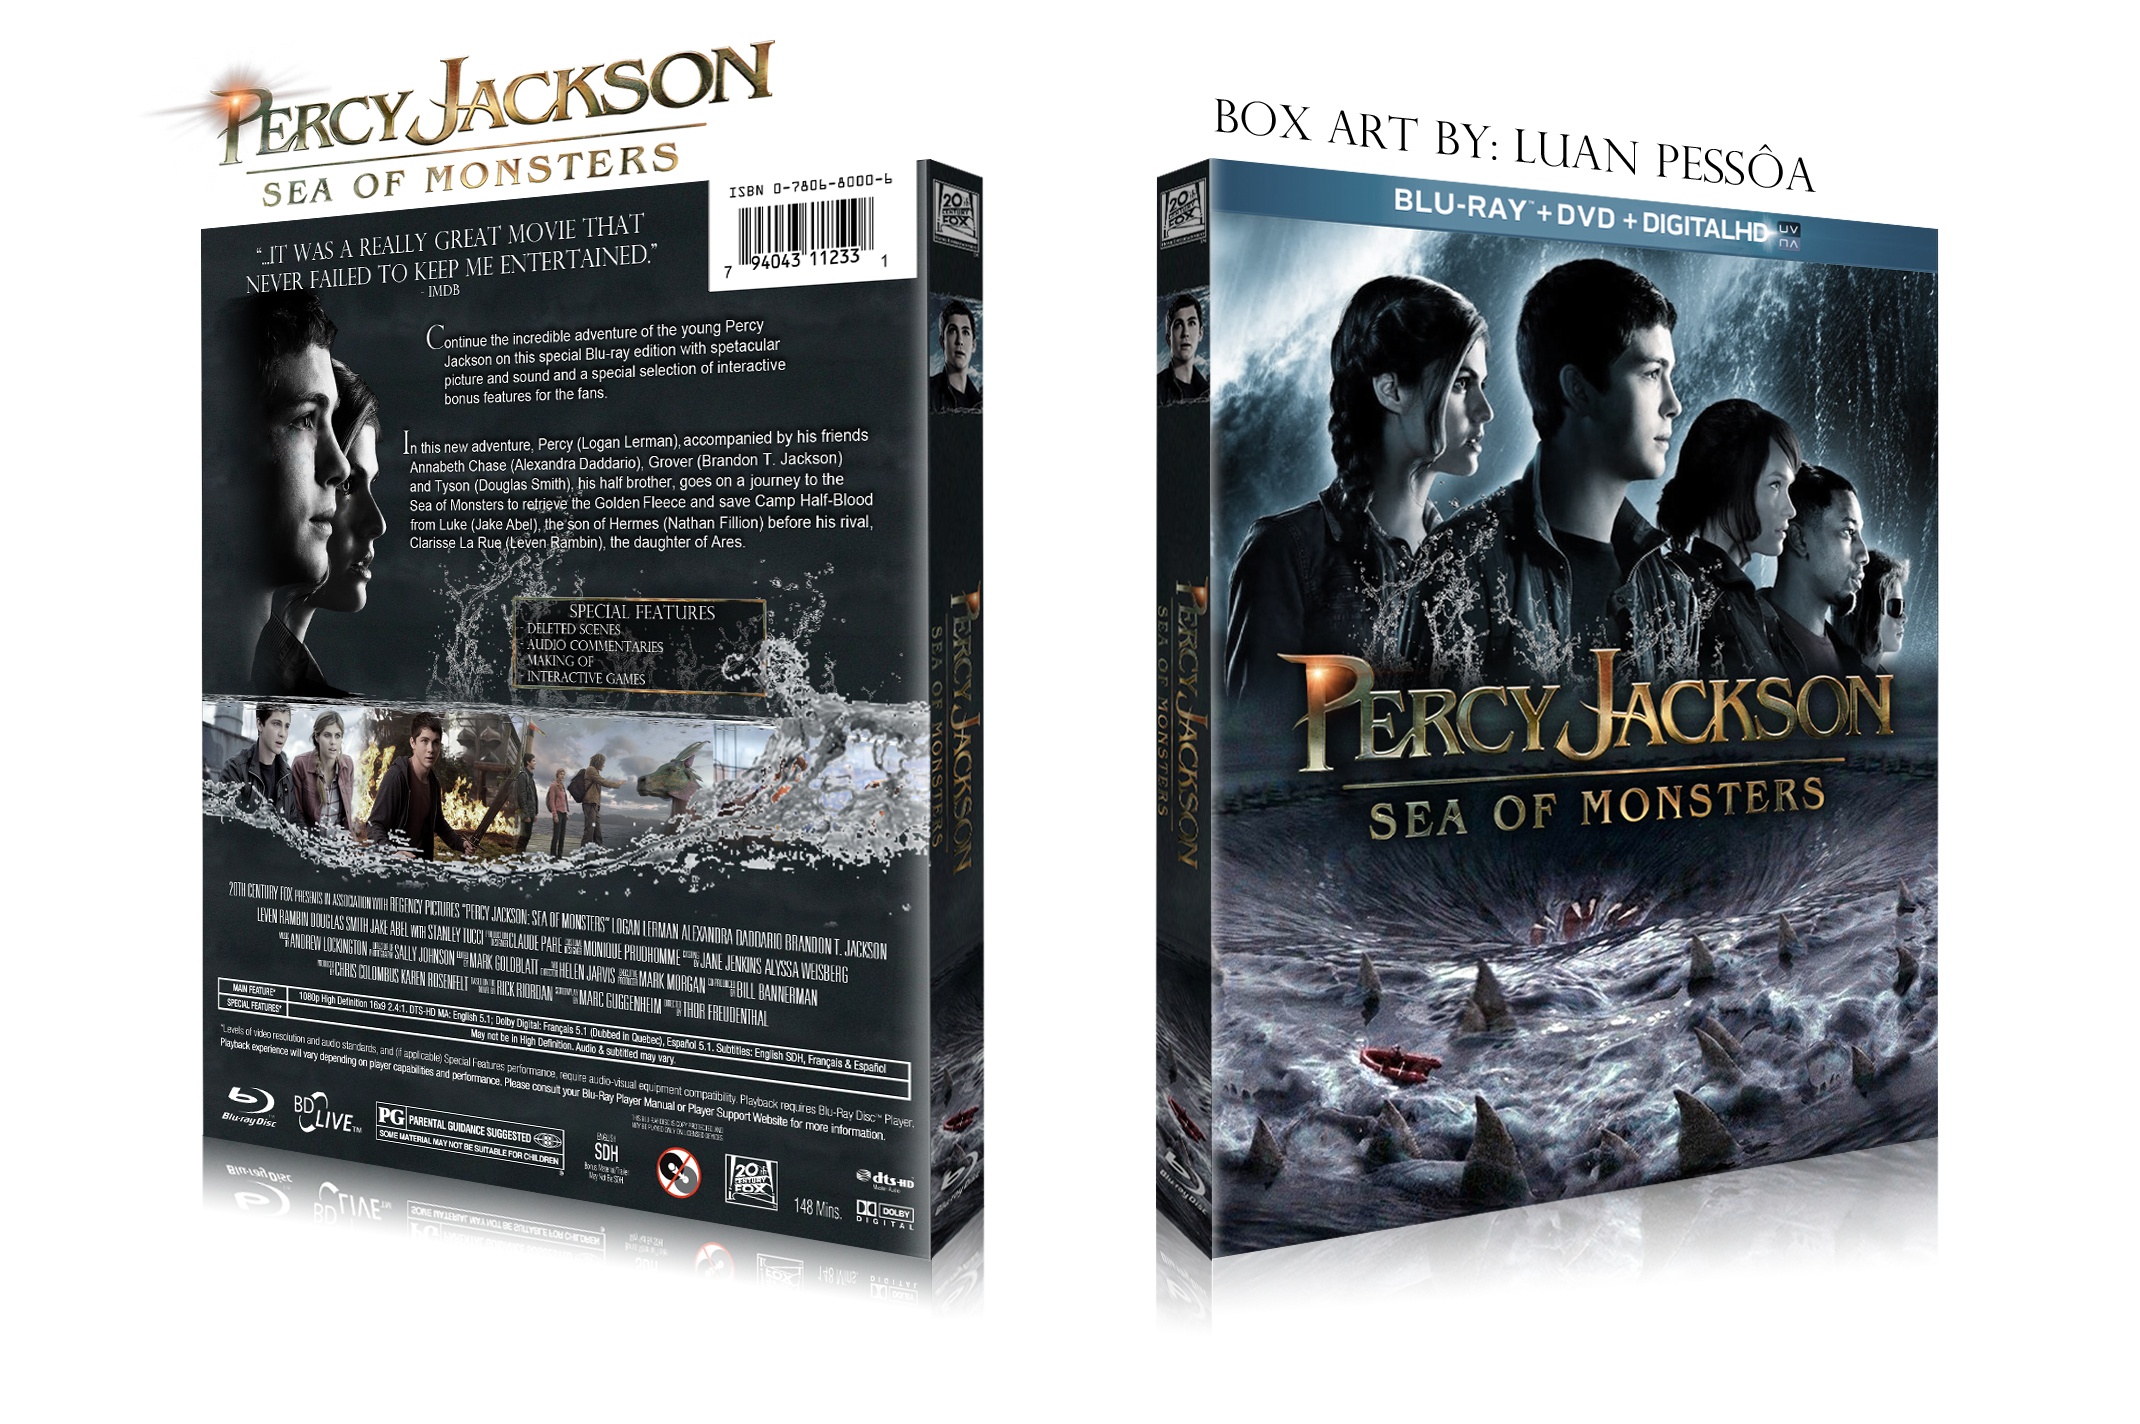 Percy Jackson: Sea of Monsters box cover